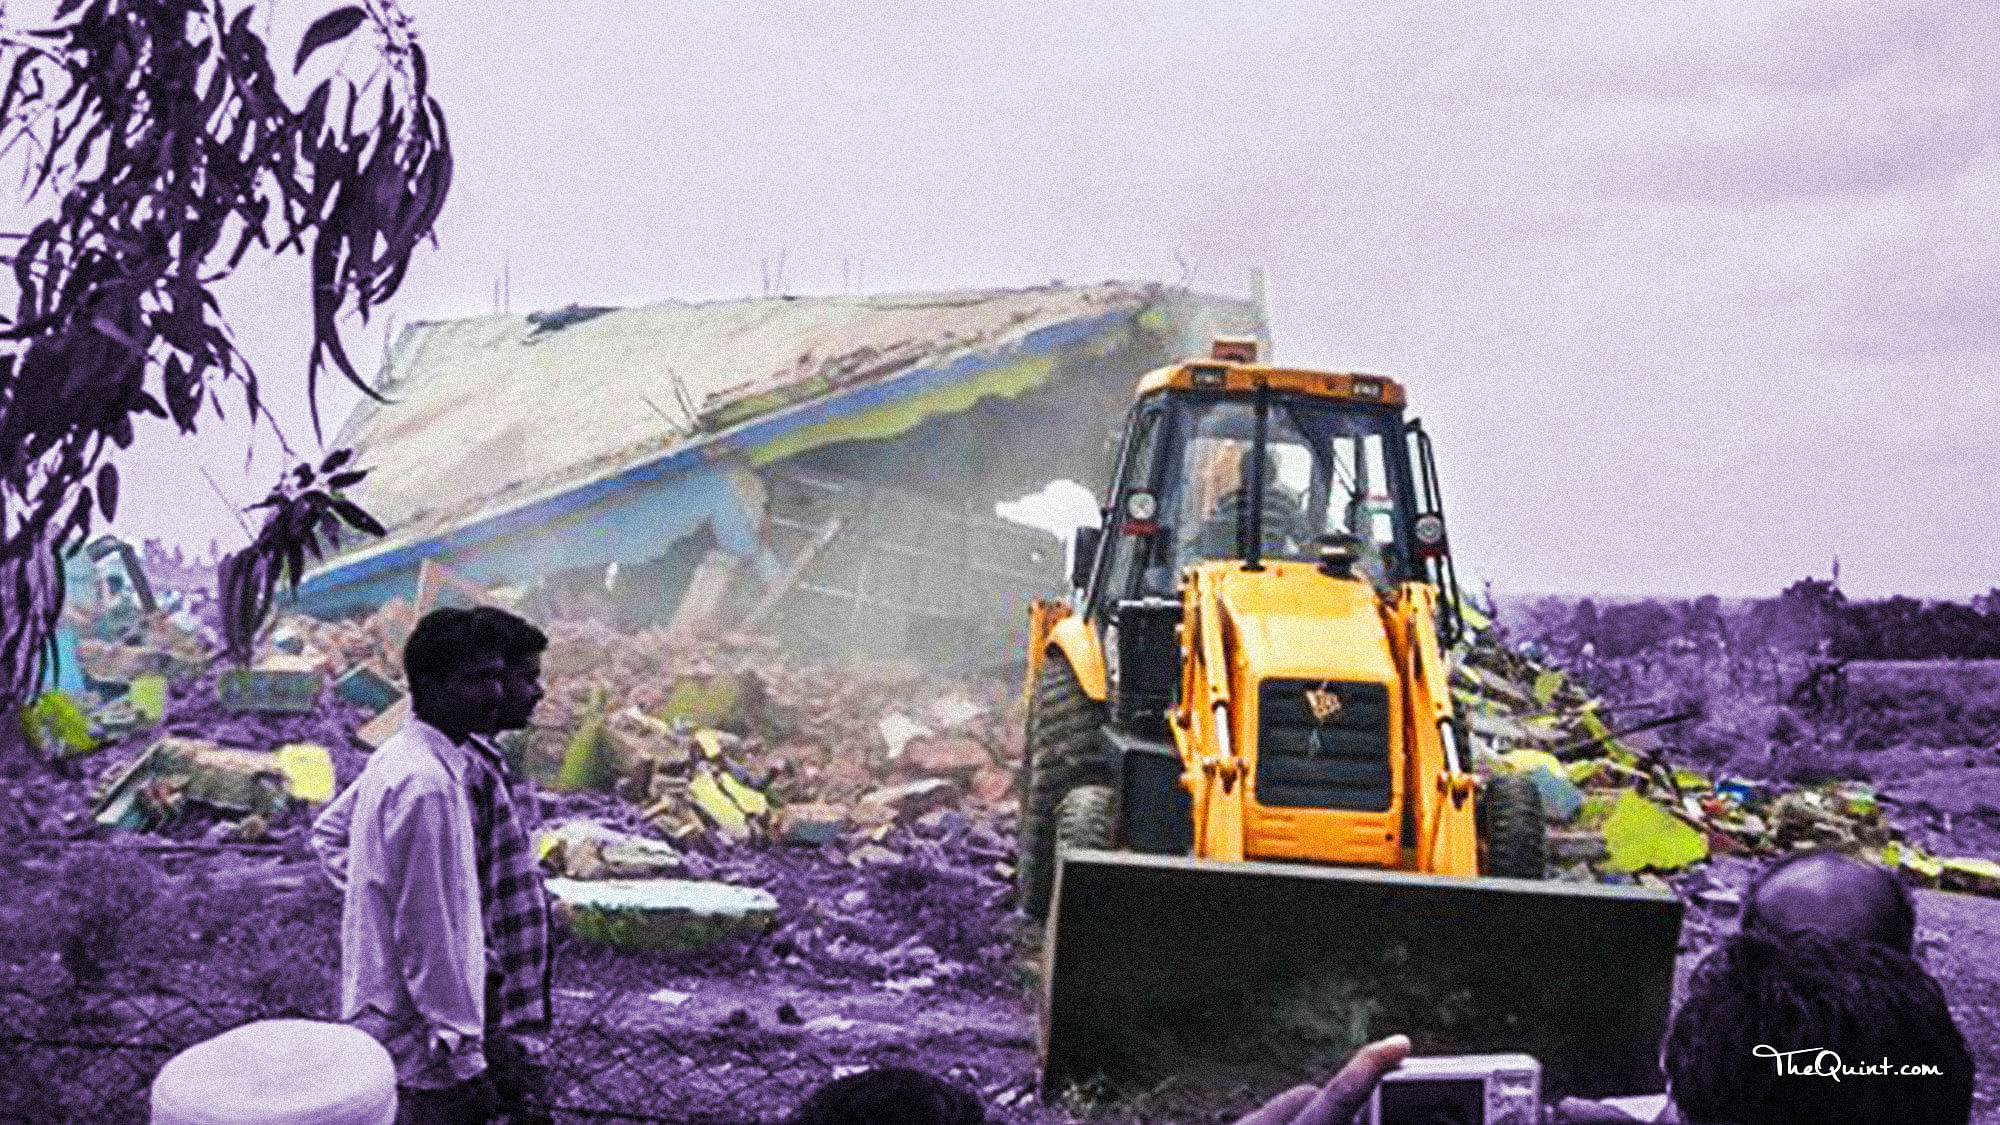 Chauthiya village being razed down by earthmoving machines in 2007. (Photo: <b>The Quint</b>)